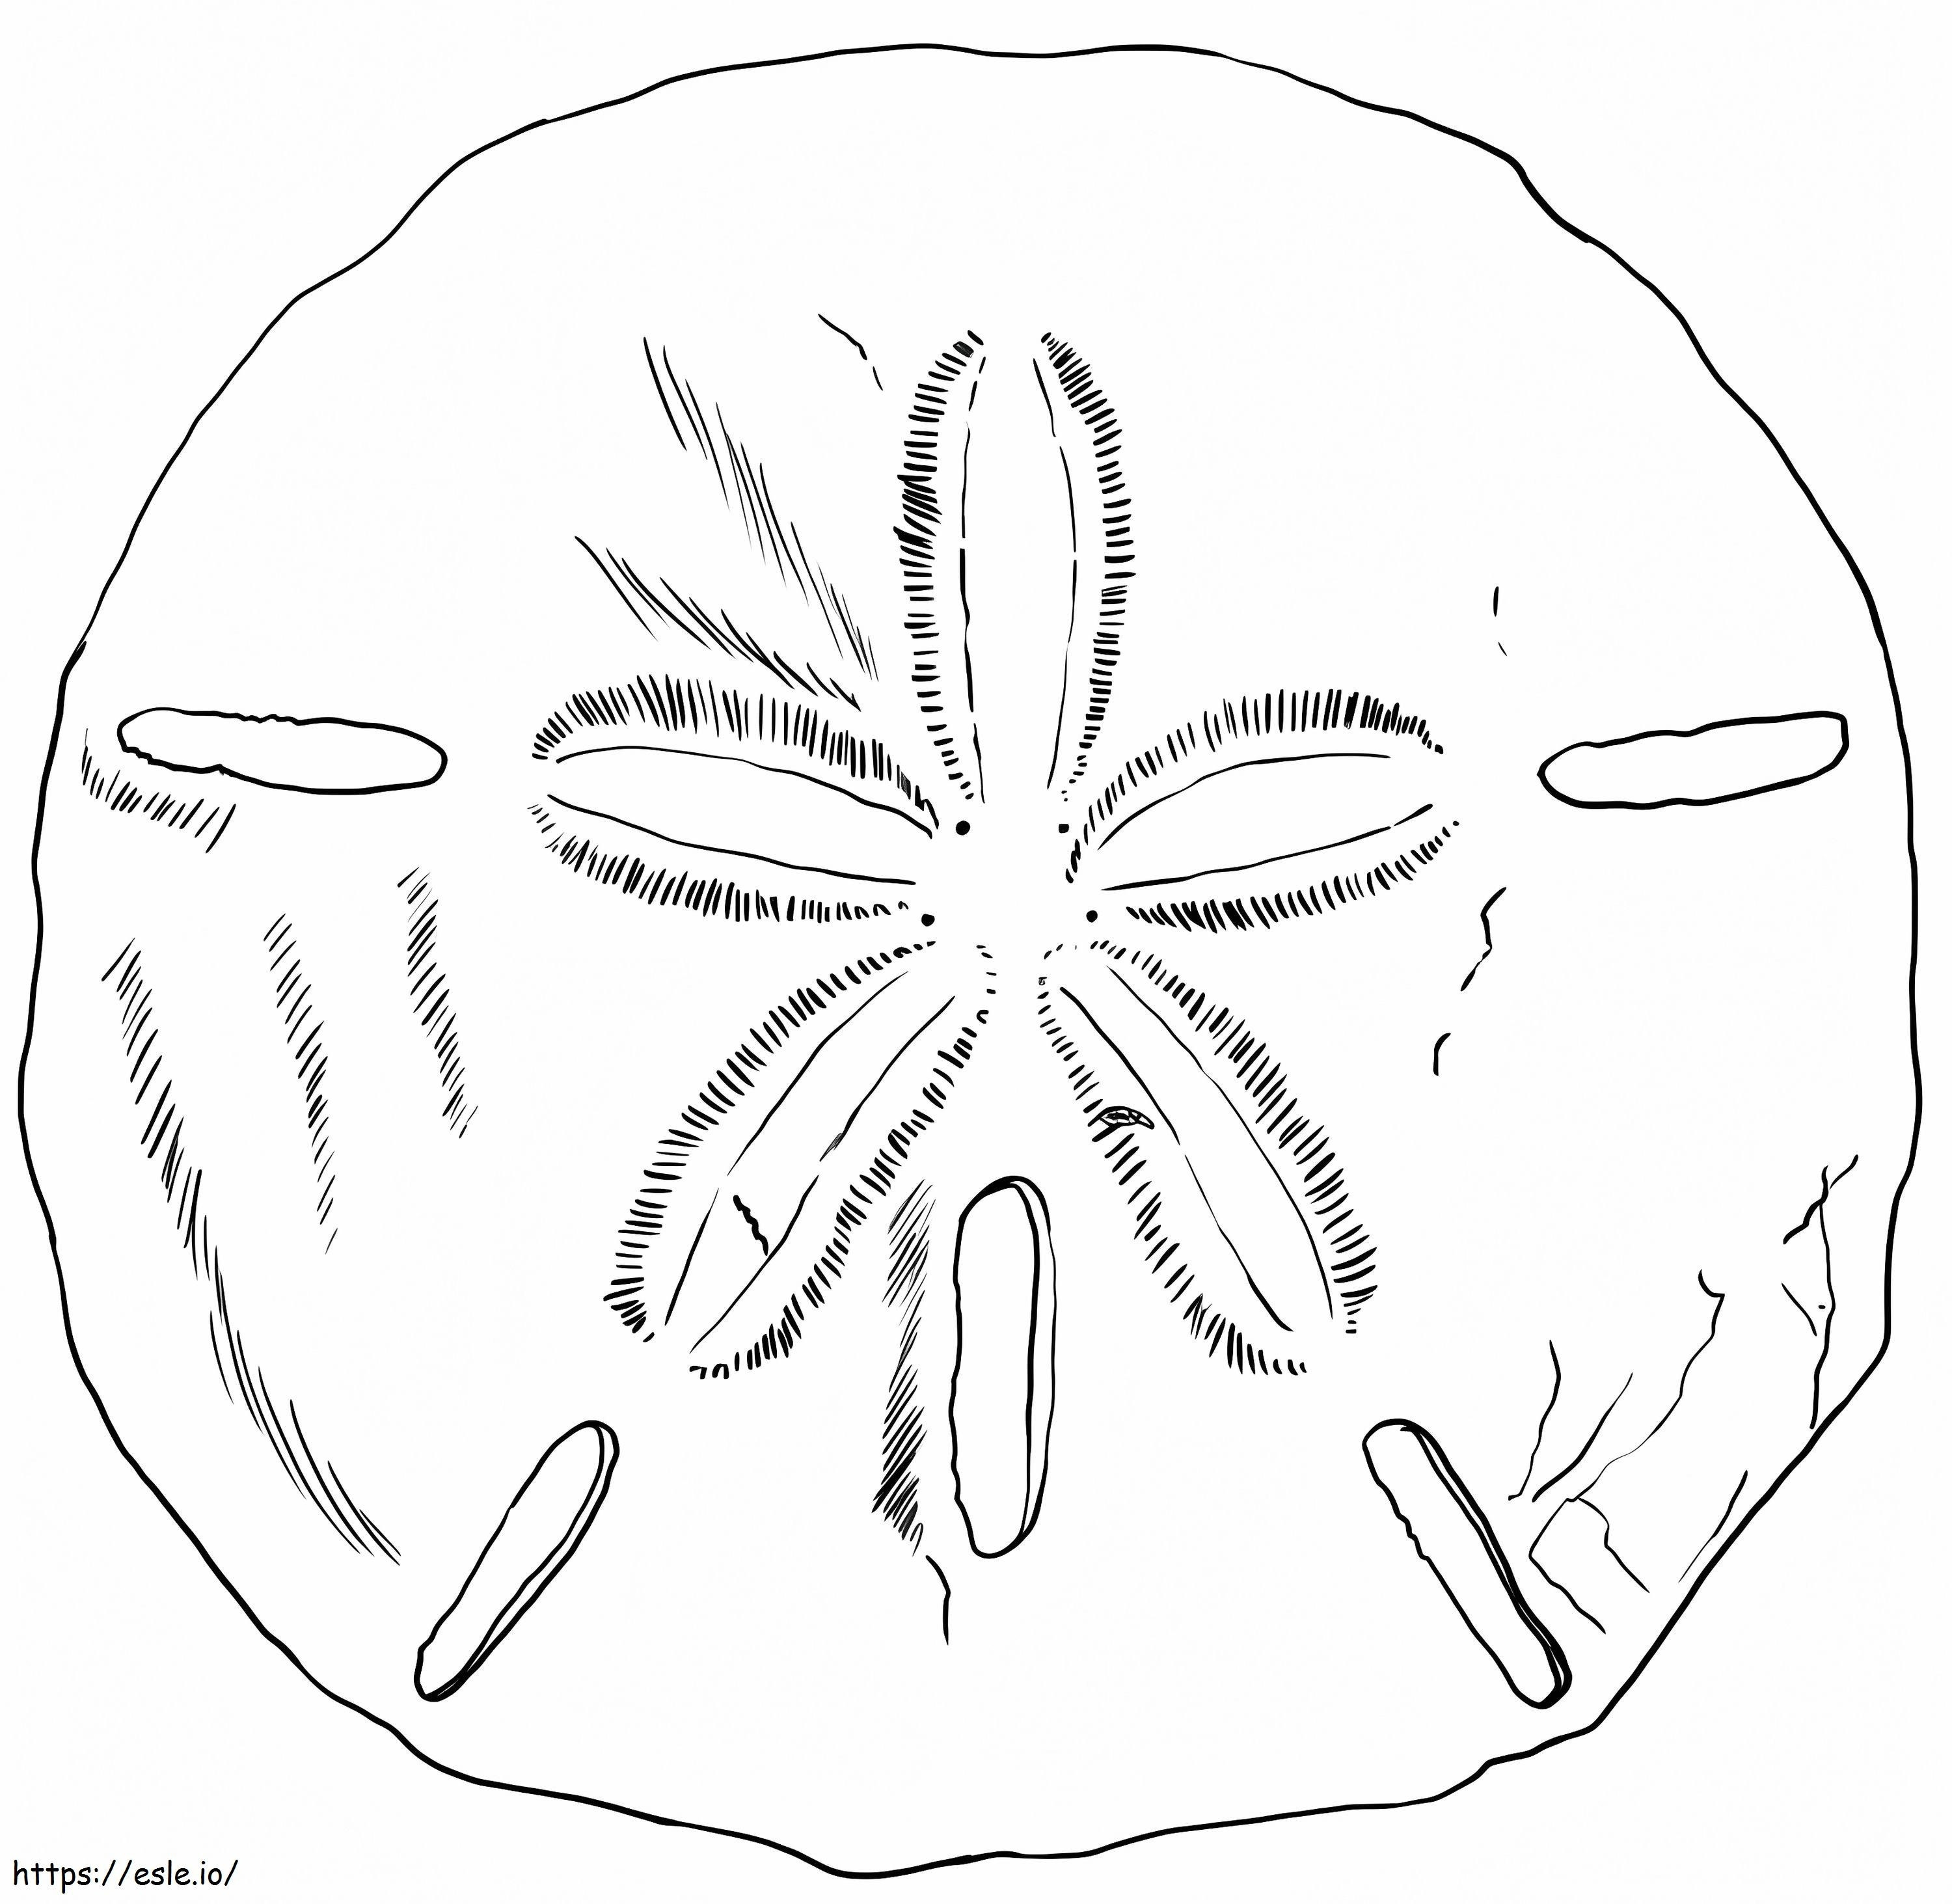 Sand Dollar 11 coloring page